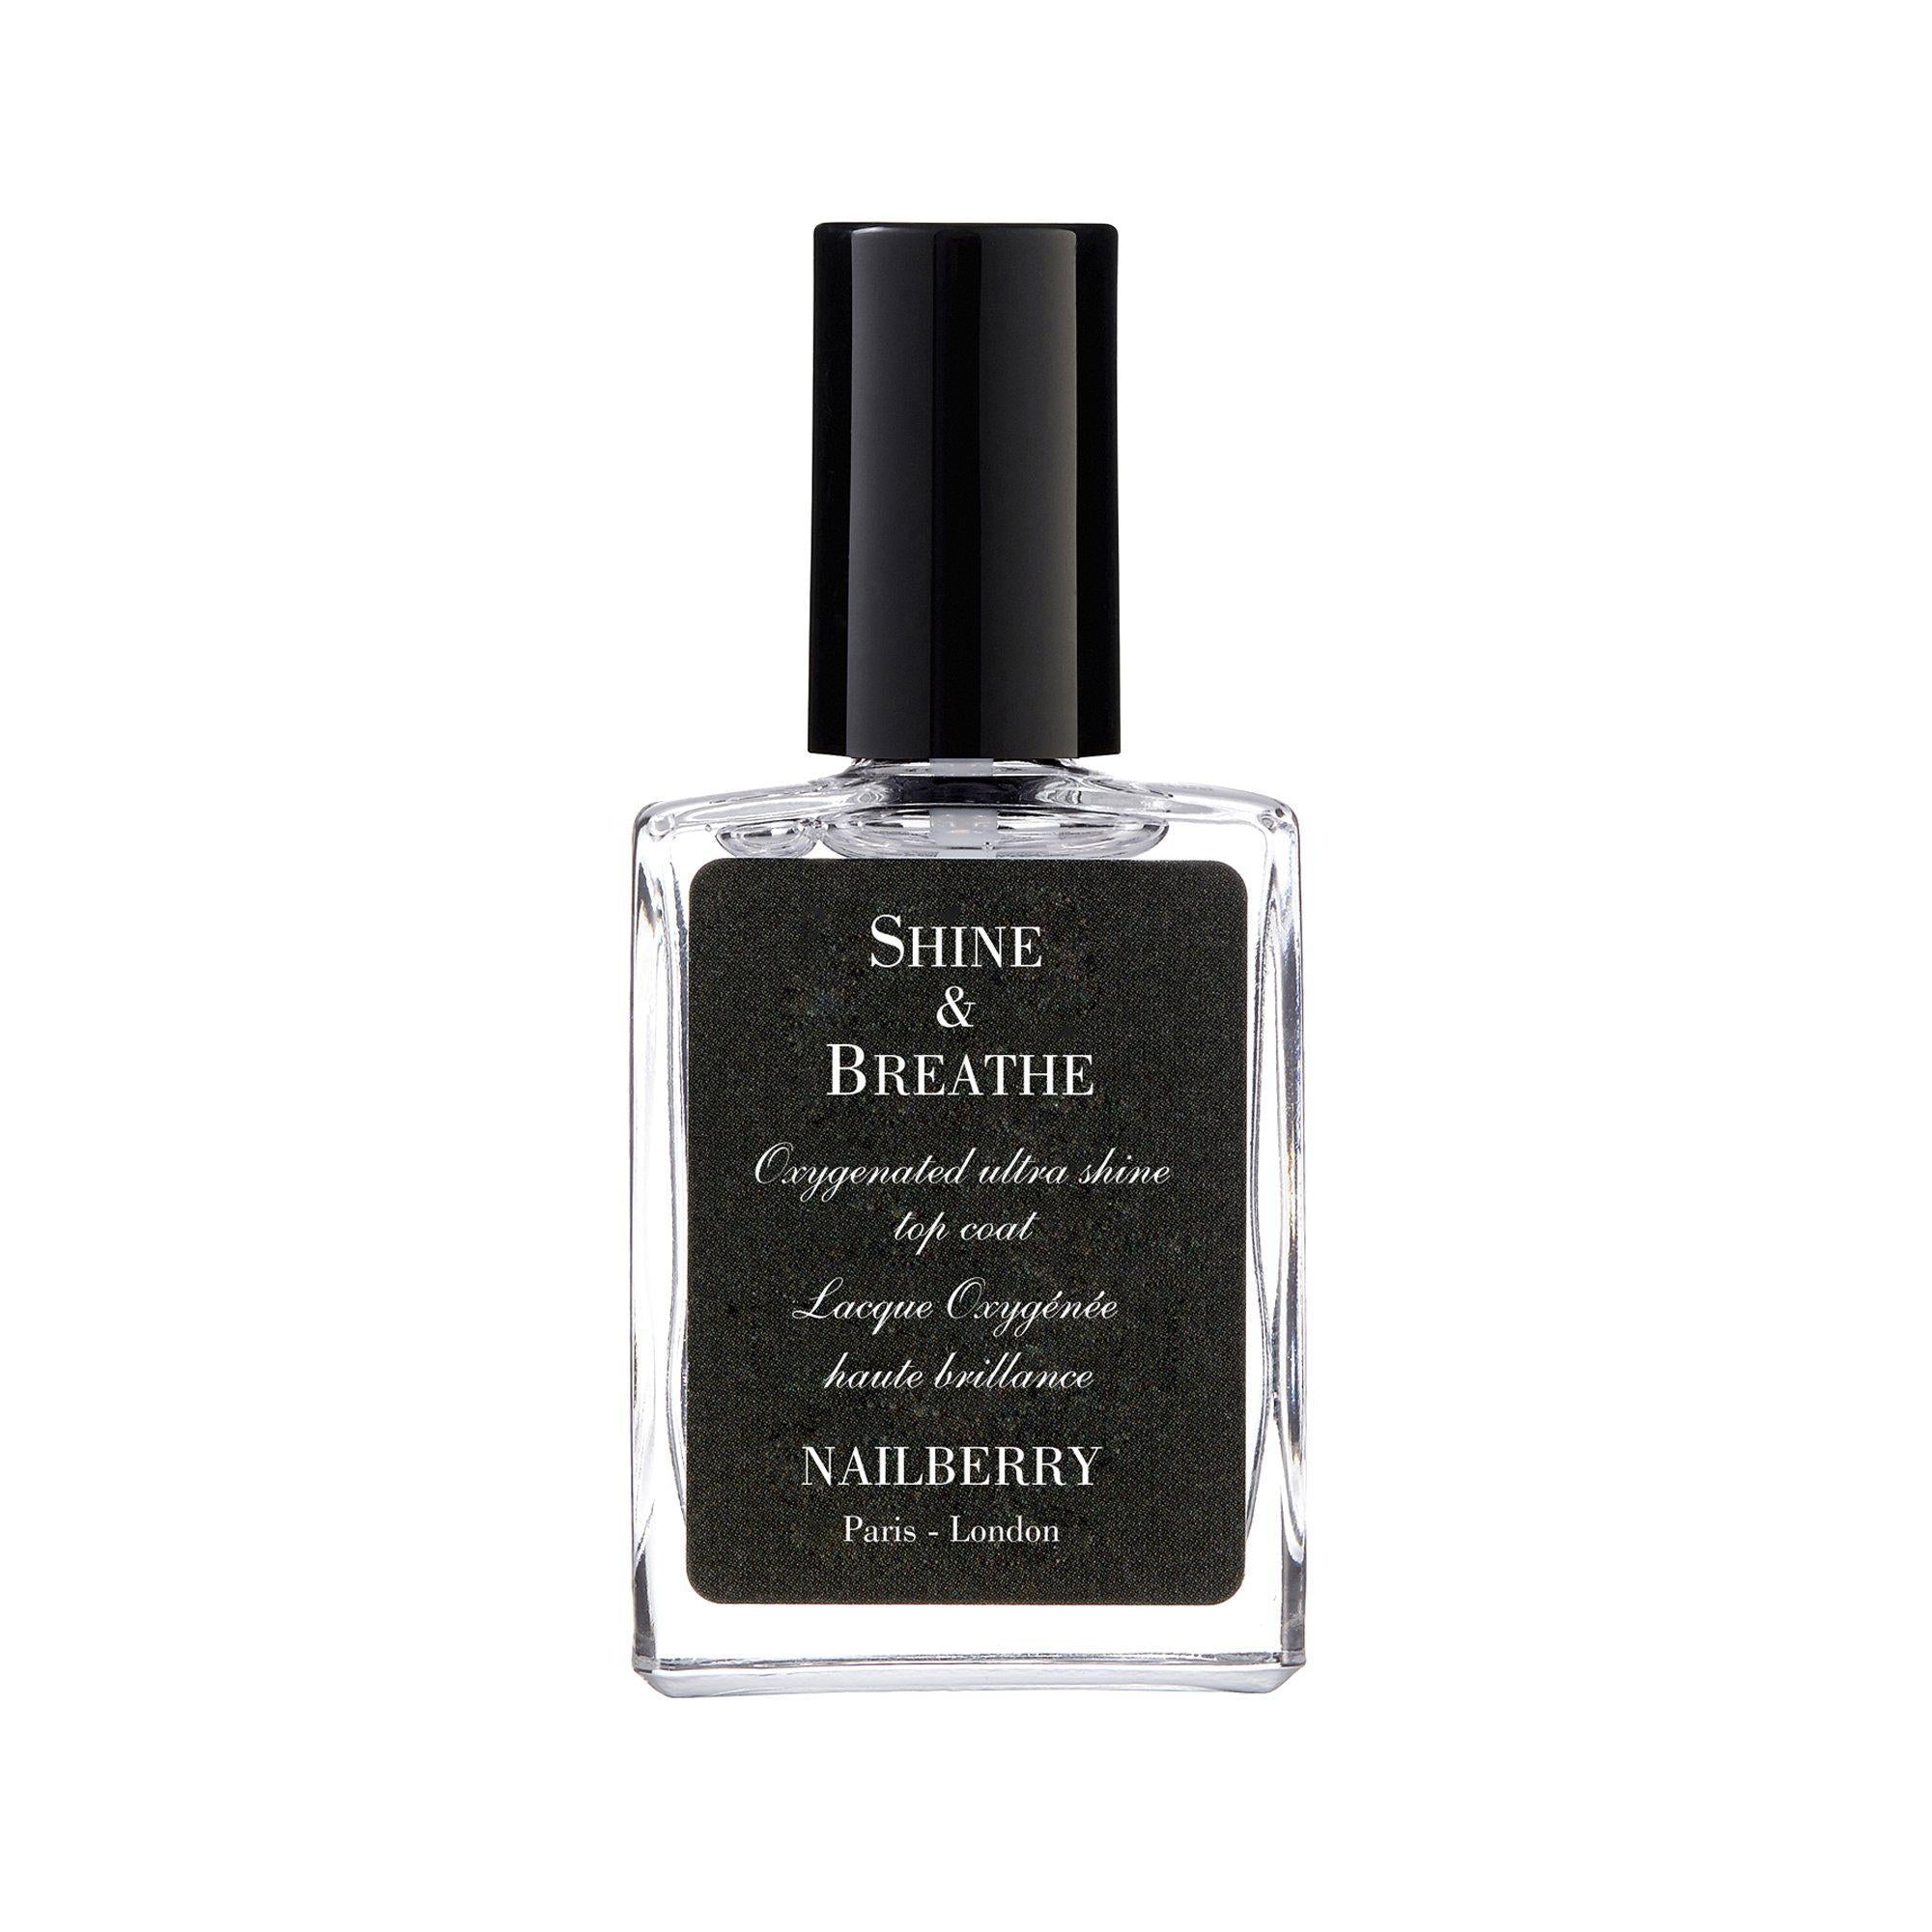 Indisponible : Laque Oxygénée Haute Brillance Shine & Breathe Unavailable: Shine &amp; Breathe Oxygenated High Gloss Lacquer - Nailberry